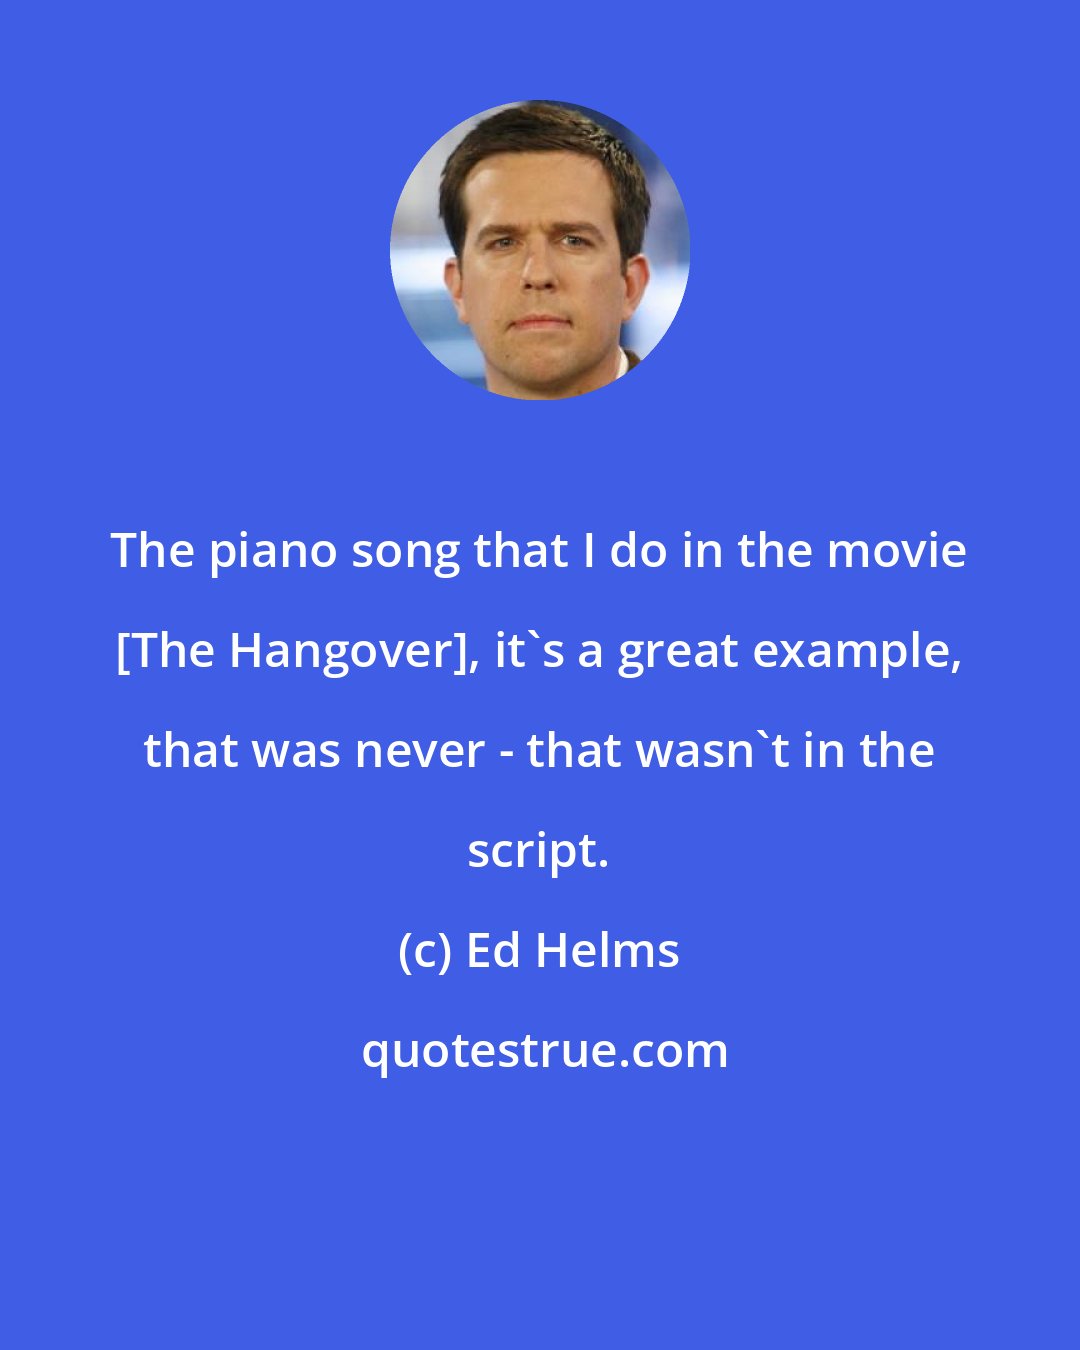 Ed Helms: The piano song that I do in the movie [The Hangover], it's a great example, that was never - that wasn't in the script.